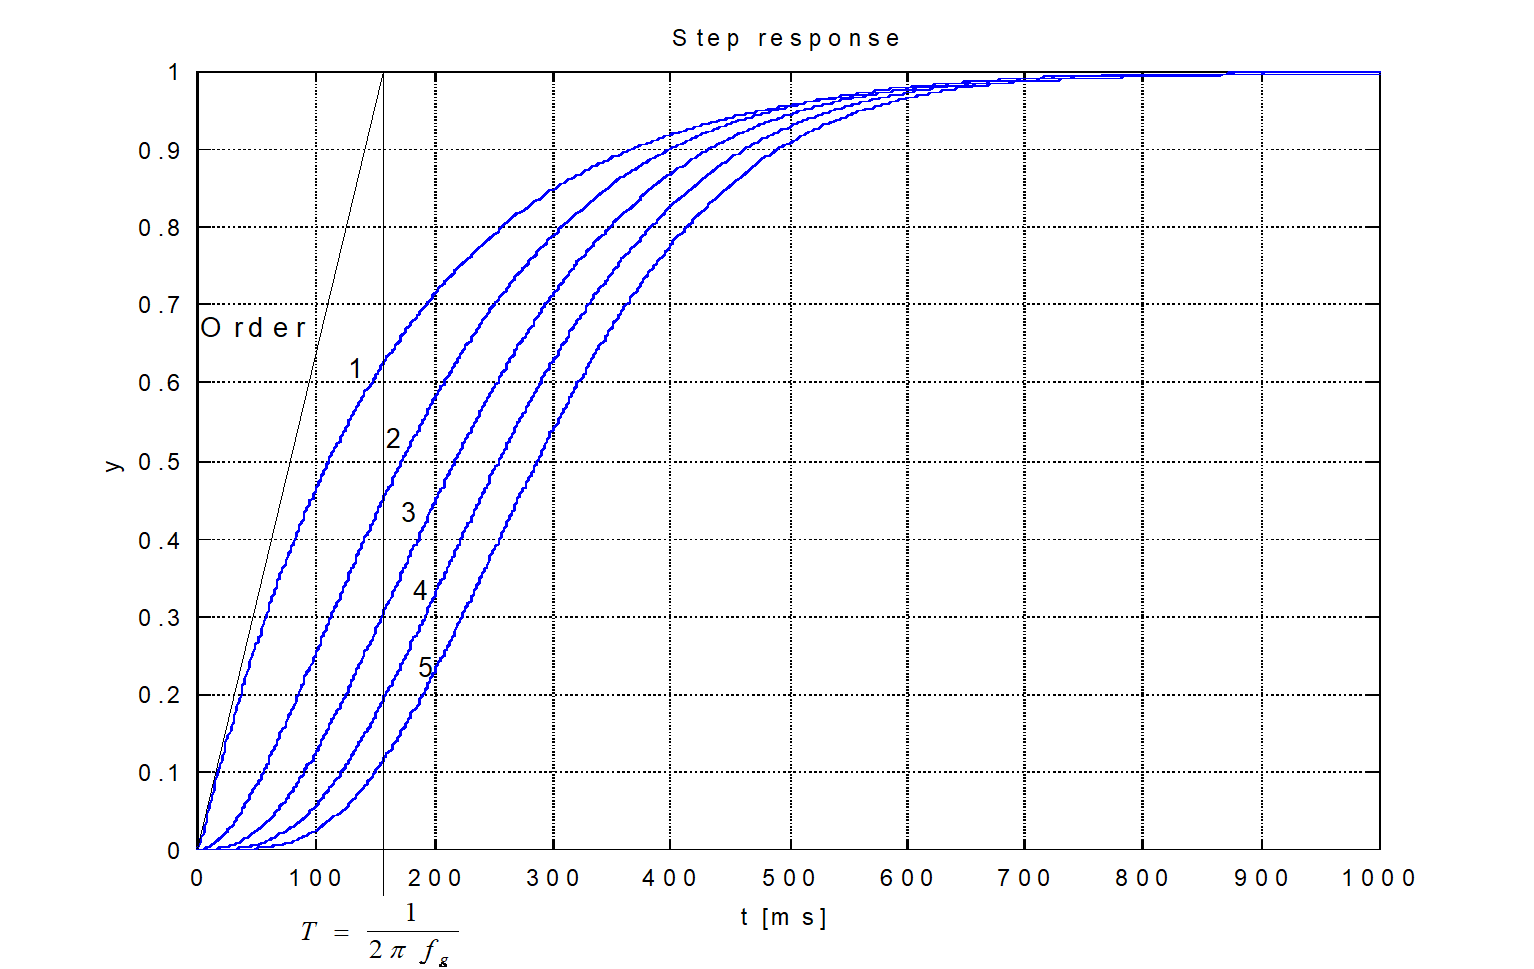 Step response of low-pass filters of different orders